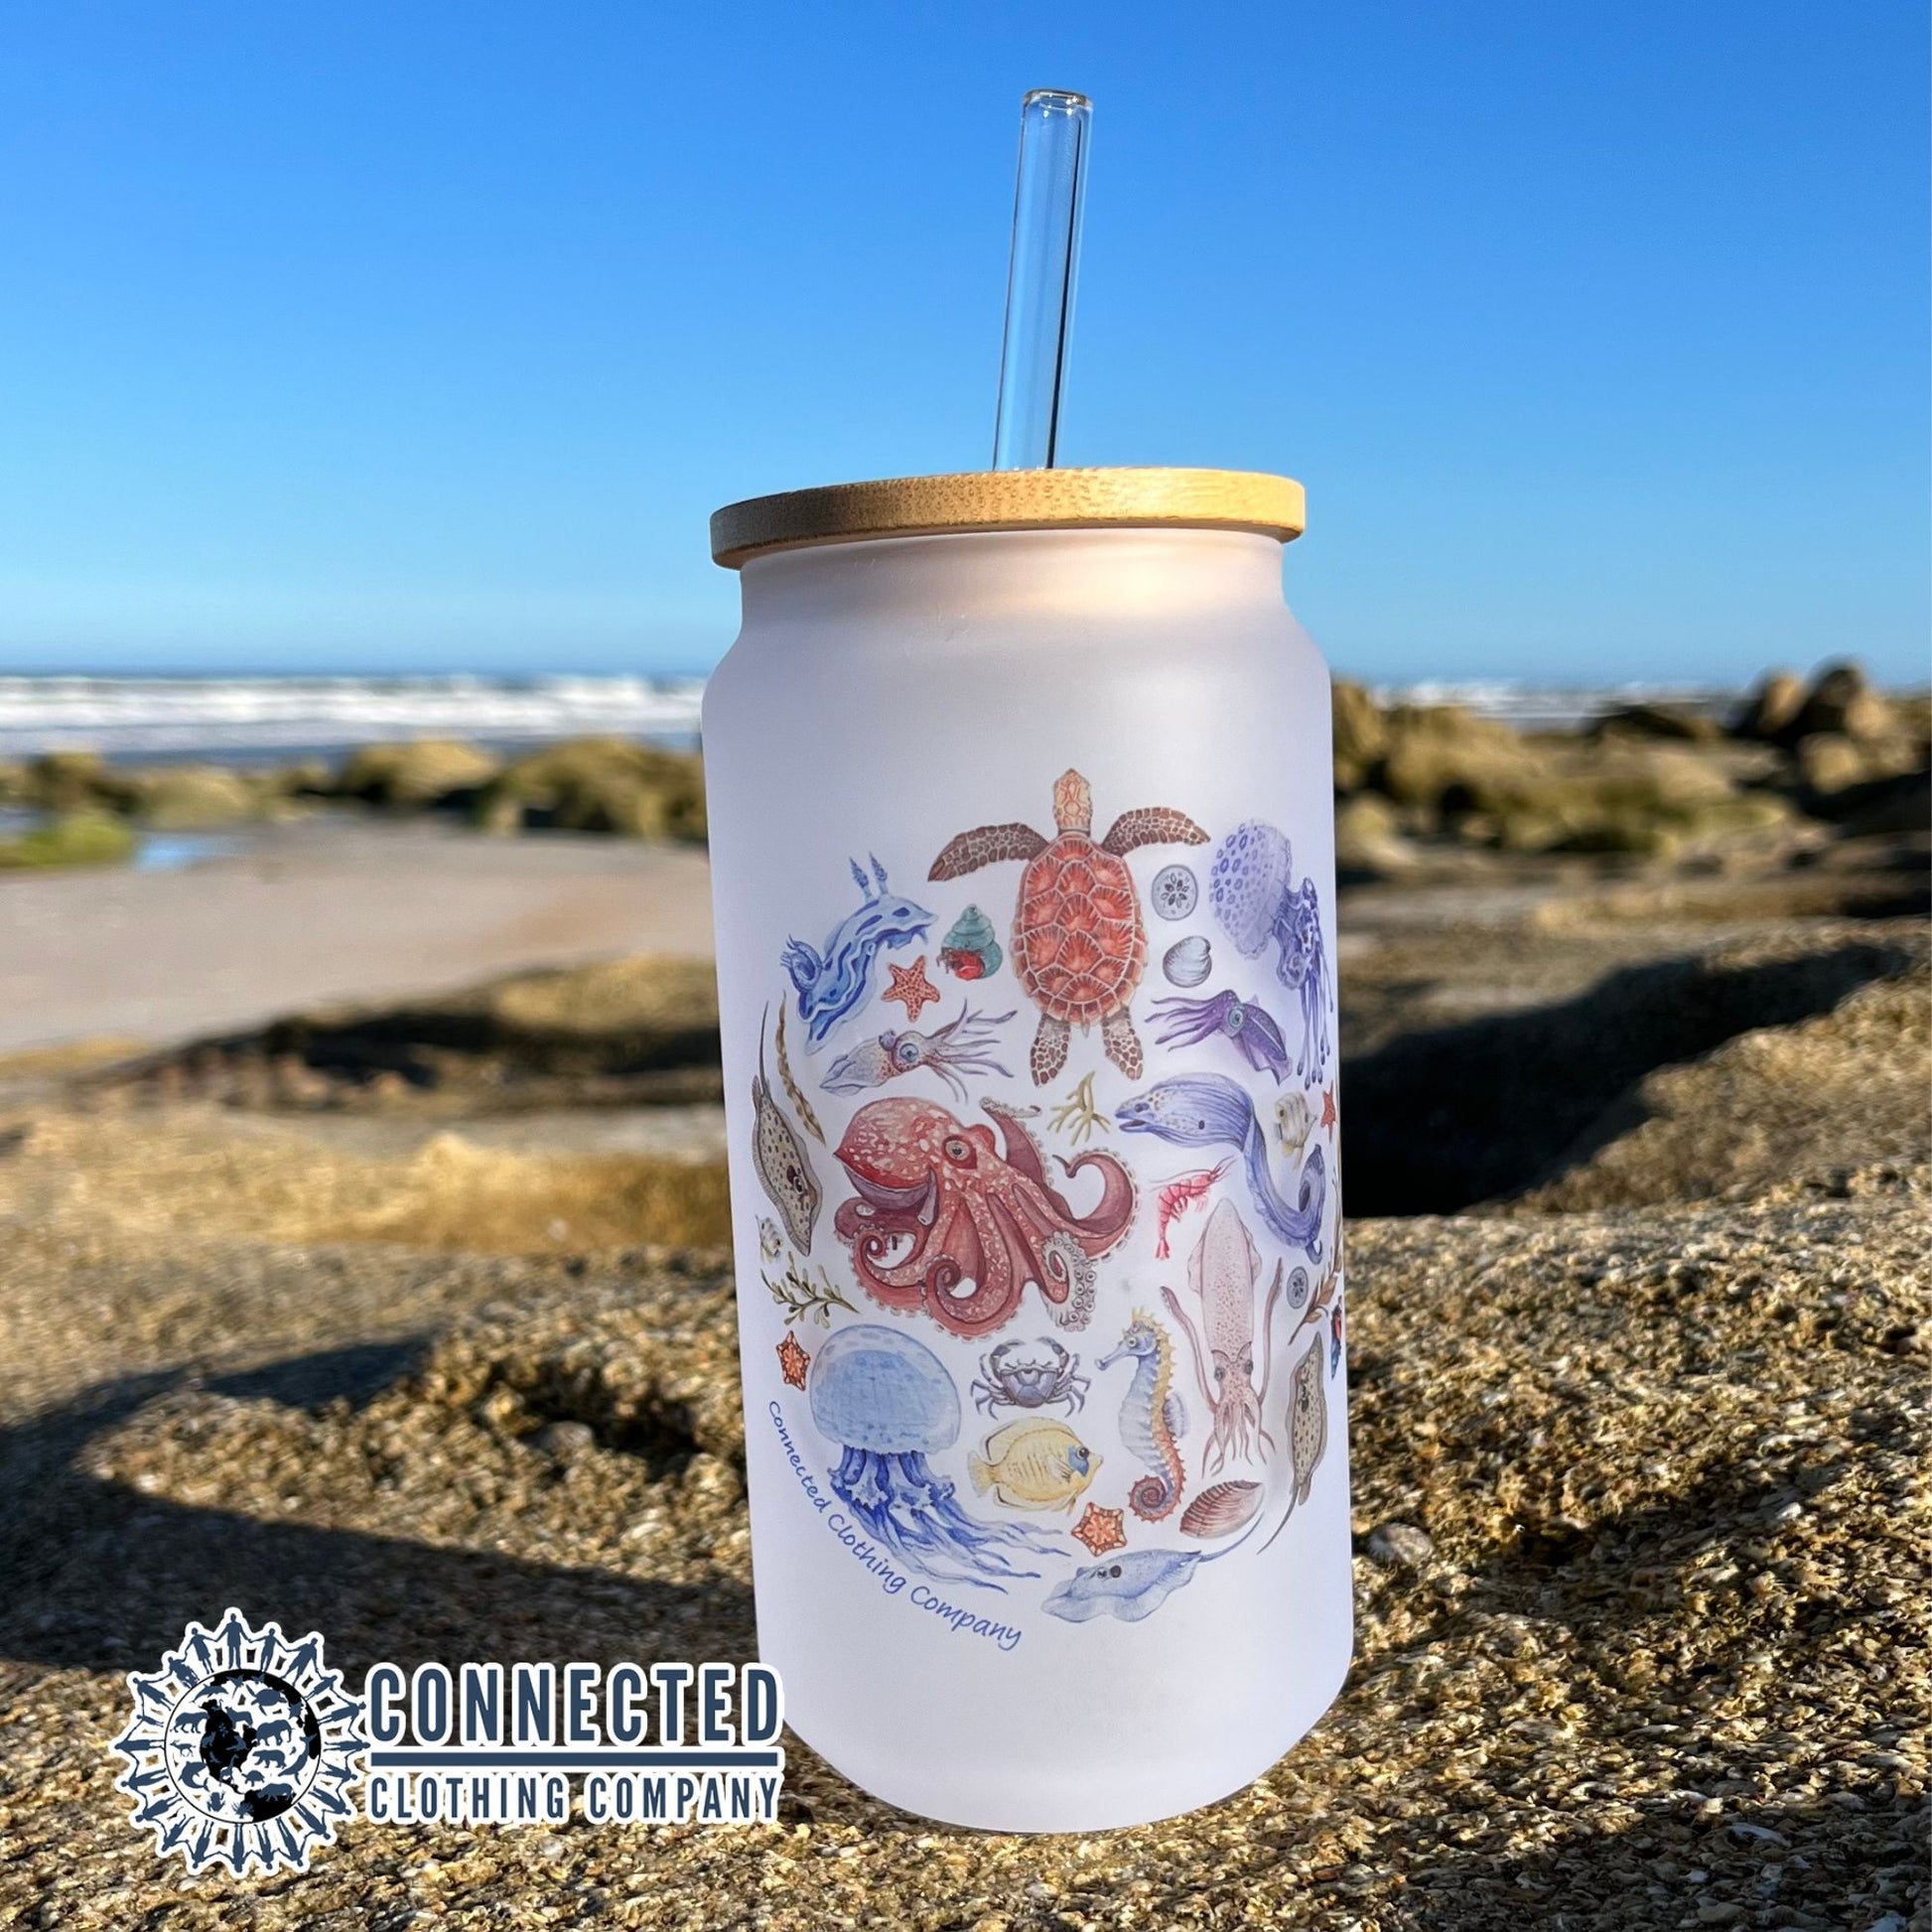 ocean sea creatures glass can - connected clothing company - 10% of proceeds donated to ocean conservation